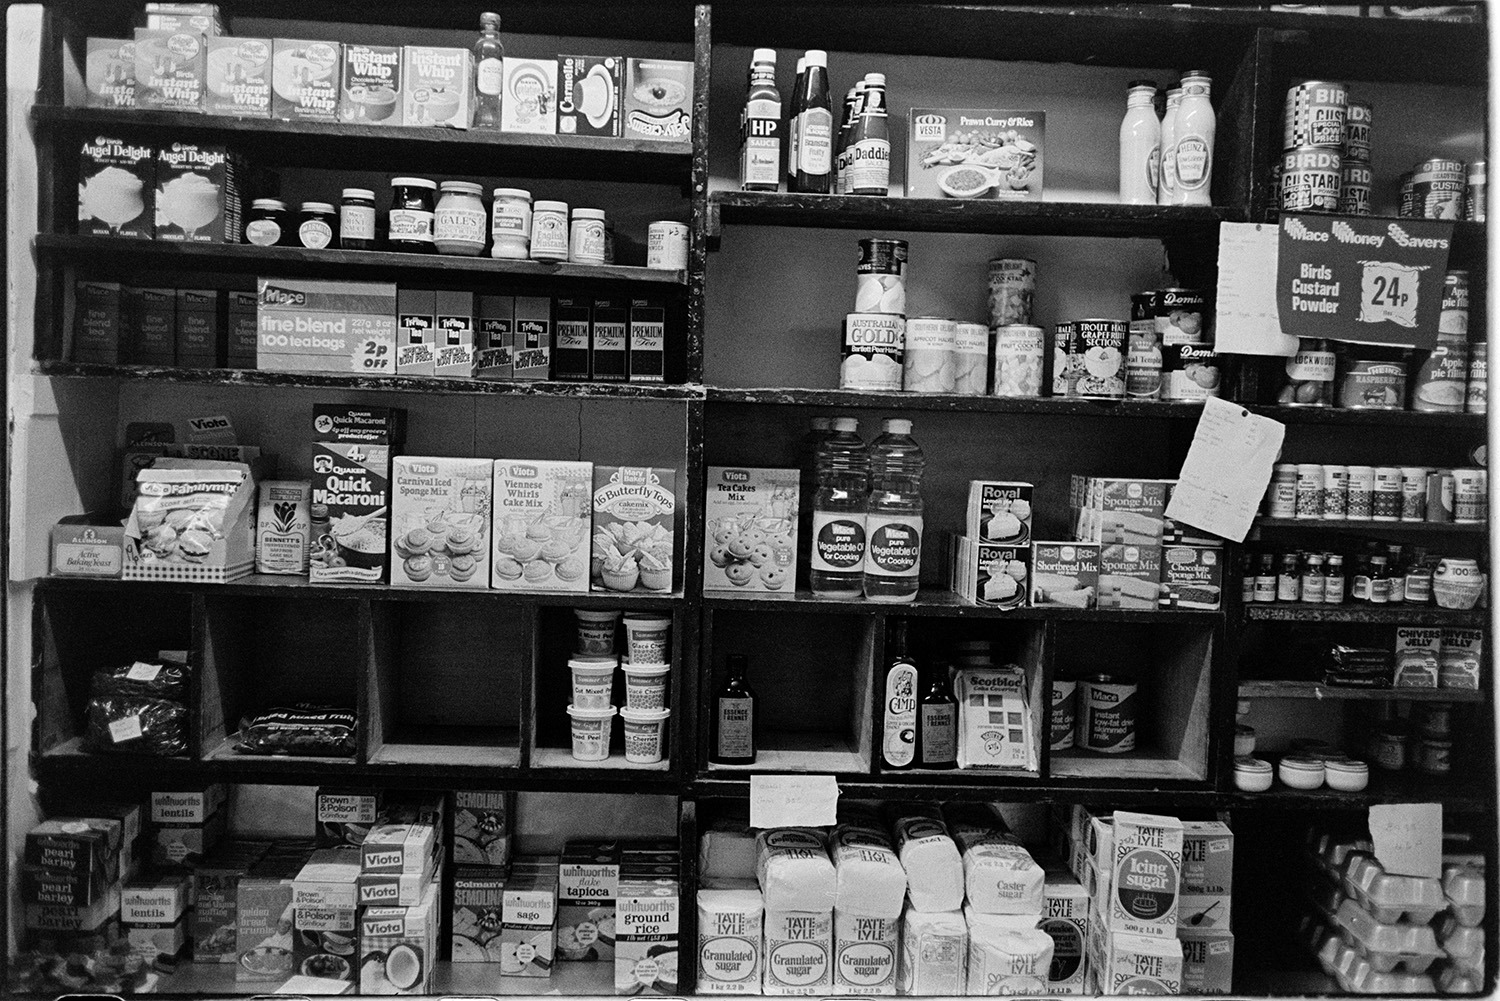 Interior of village shop with woman serving customers, goods on shelves, bacon slicer. 
[Various goods on display on the shelves in Merton Stores, including angel delight, cake mixes, HP sauce, eggs and bags of sugar.]